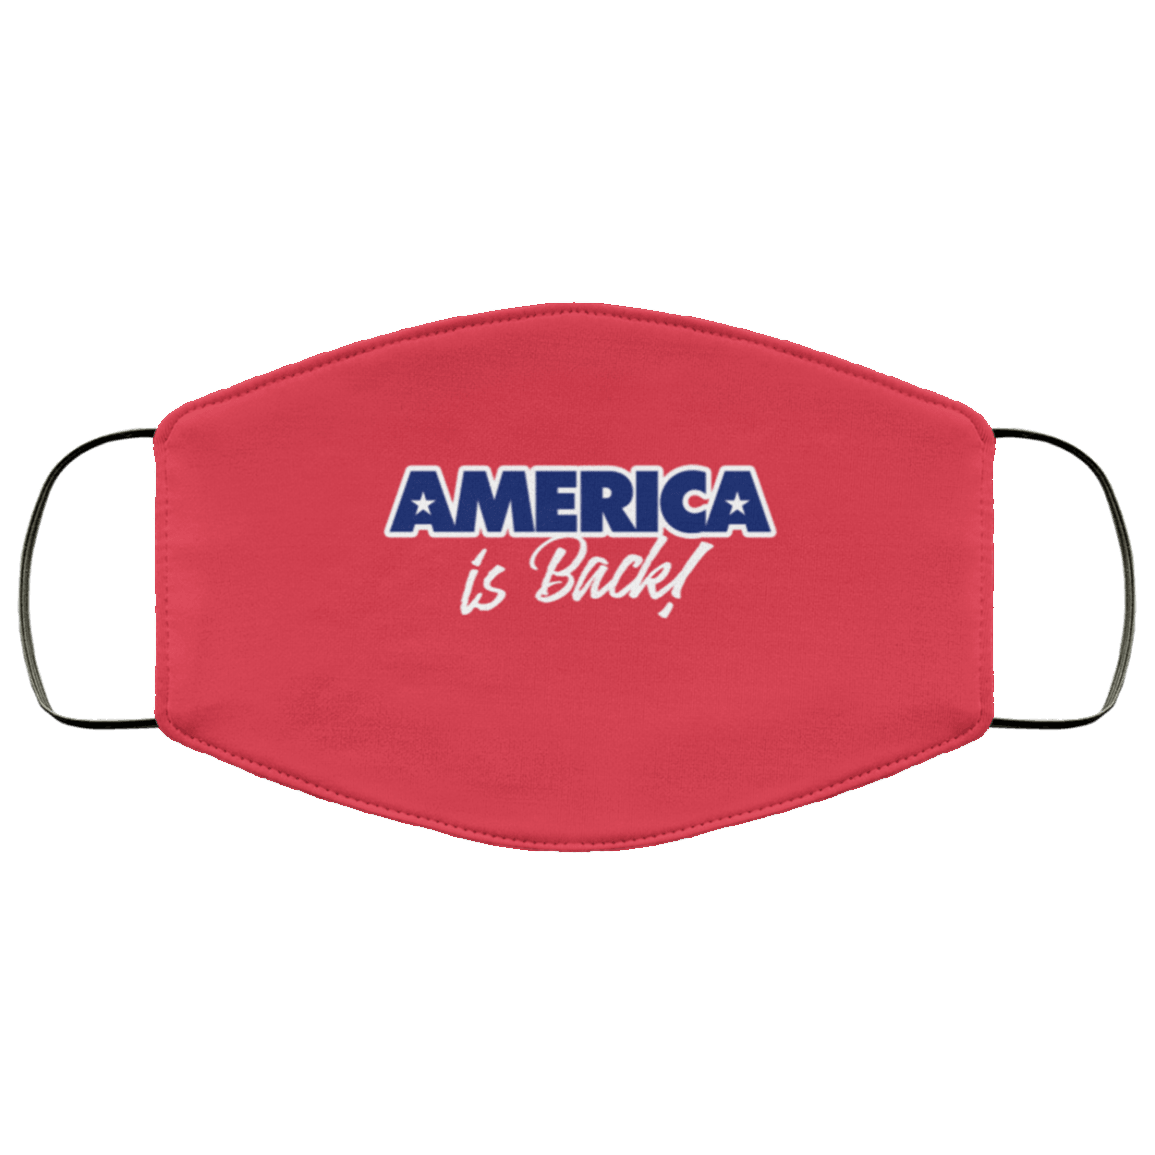 Designs by MyUtopia Shout Out:America Is Back Trump Adult Fabric Face Mask with Elastic Ear Loops,3 Layer Fabric Face Mask / Red / Adult,Fabric Face Mask